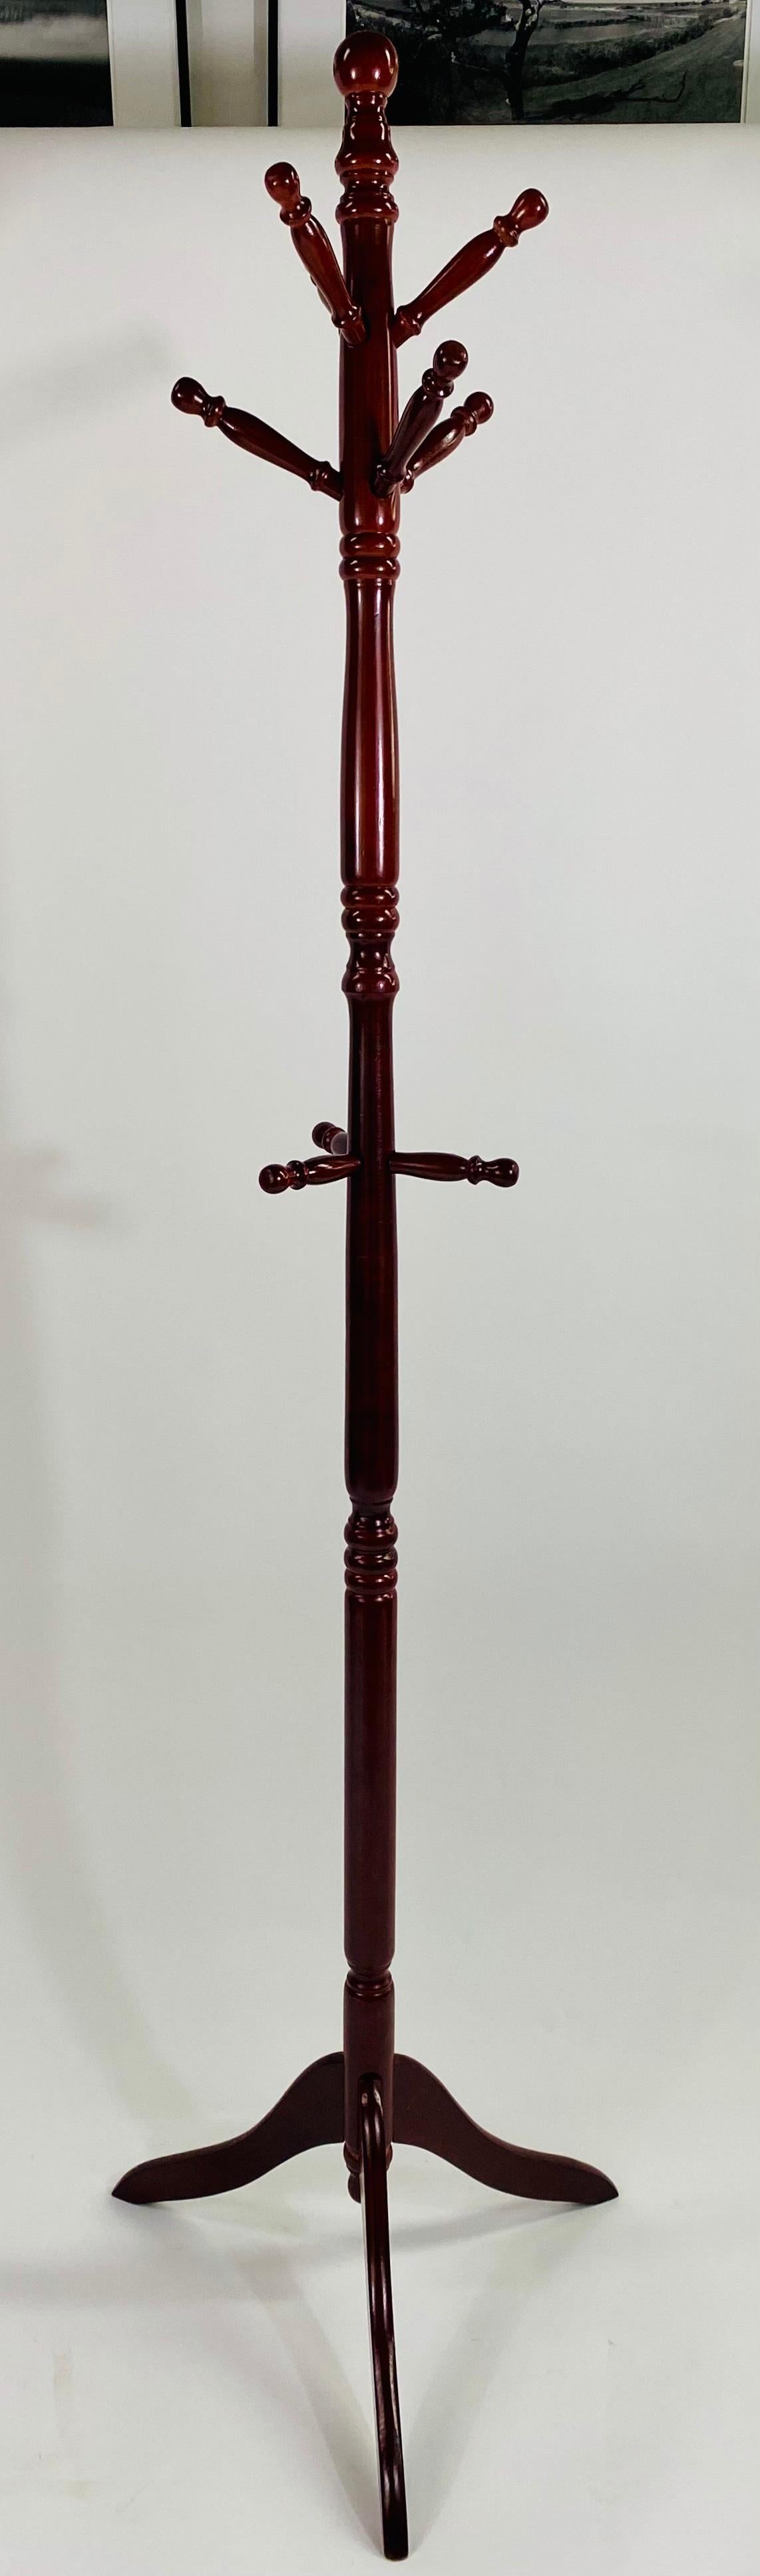 A classy and quality Coat rack or stand. The piece is beautifully hand-carved of quality rosewood and is hand-carved showing fine details. The elegant yet simplistic style of the coat rack can an addition to any home or office style. 

Dimensions